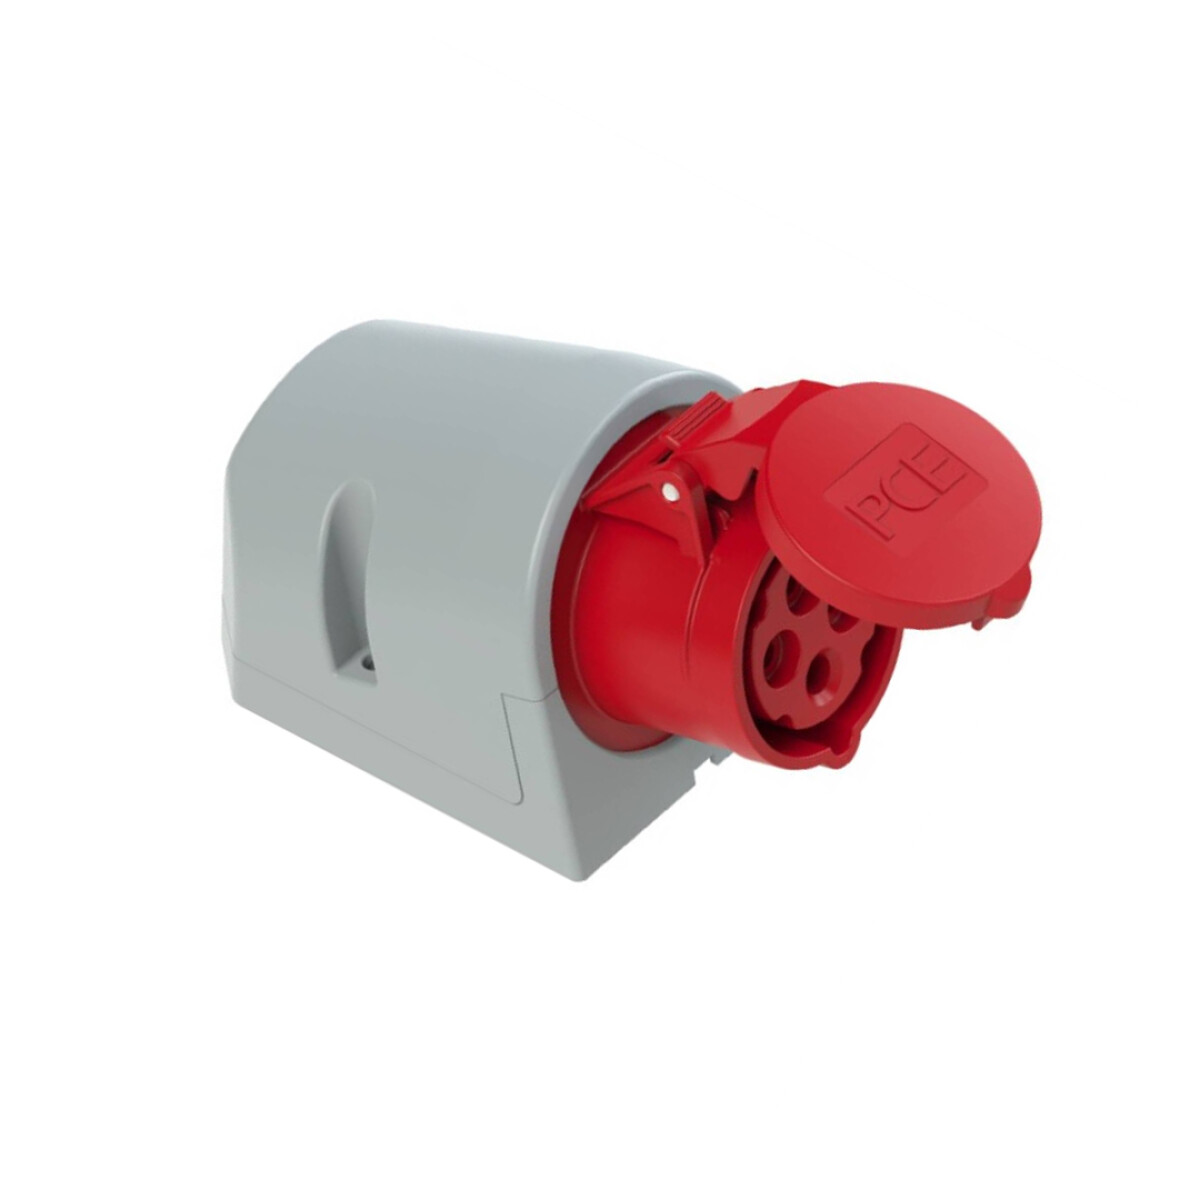 PCE Toma Pared - IP-67 380/440V H6 rojo 16A 3P+T+N 